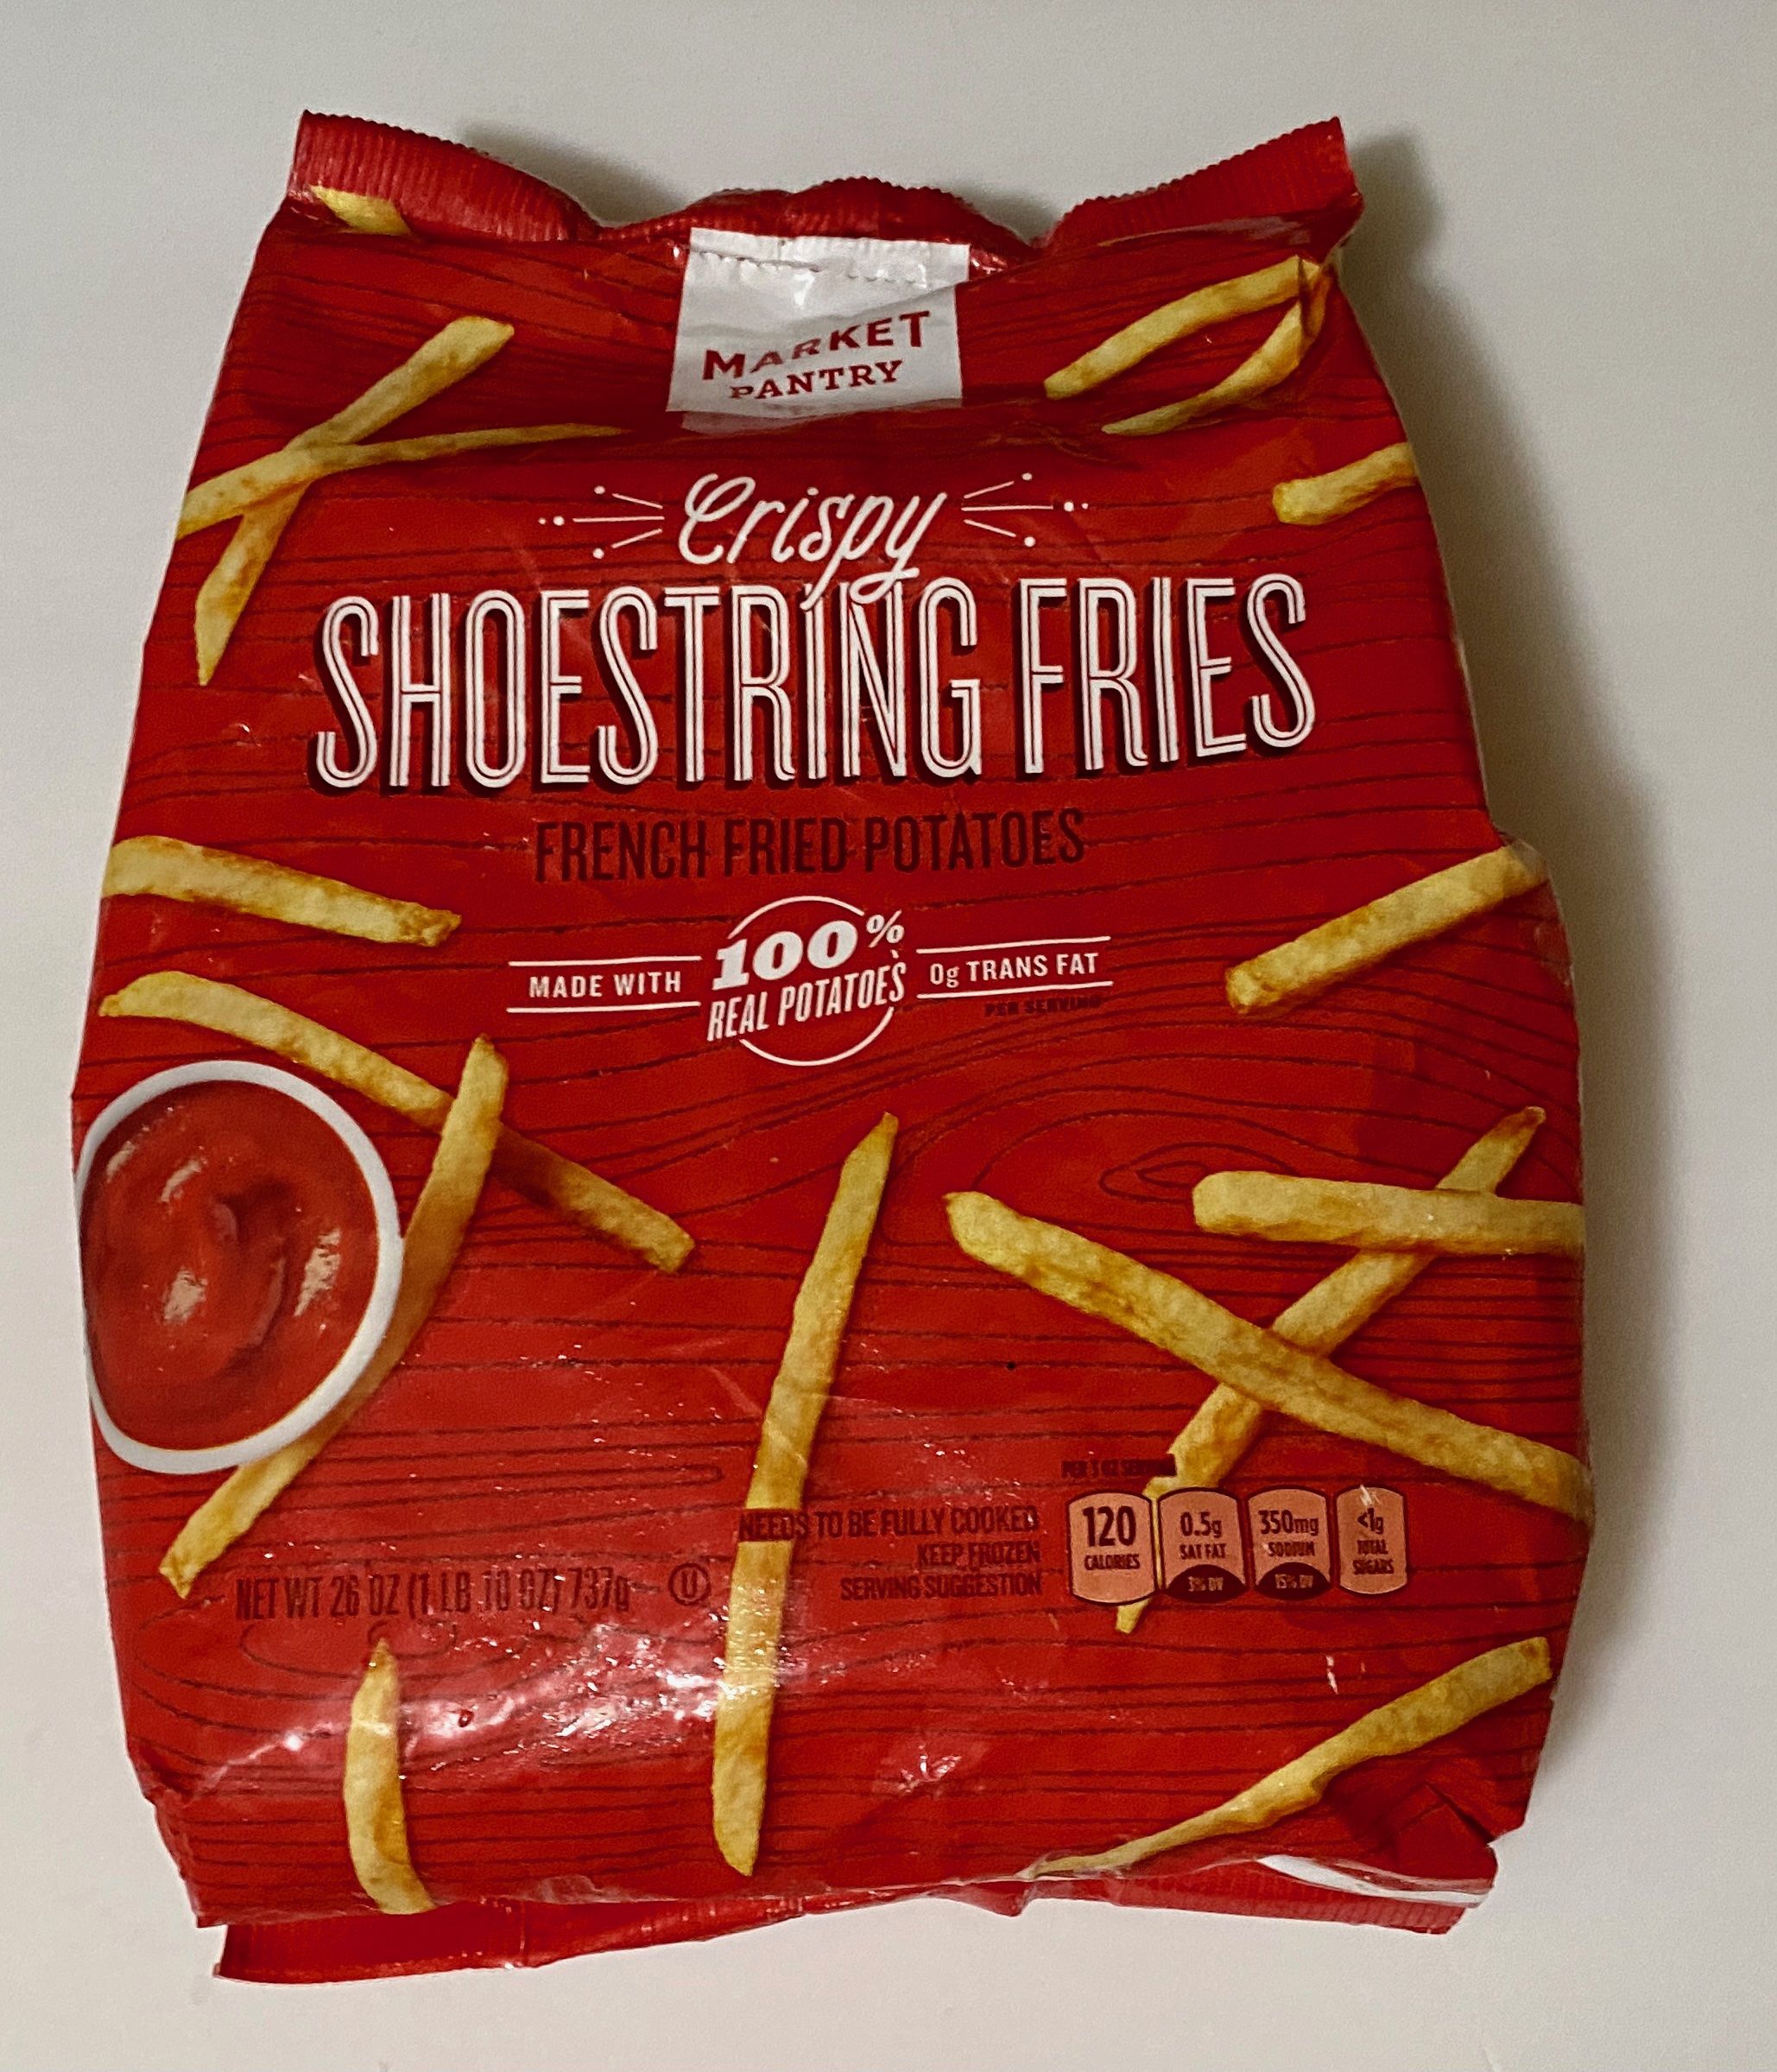 14 Popular Frozen French Fry Brands, Ranked Worst To Best